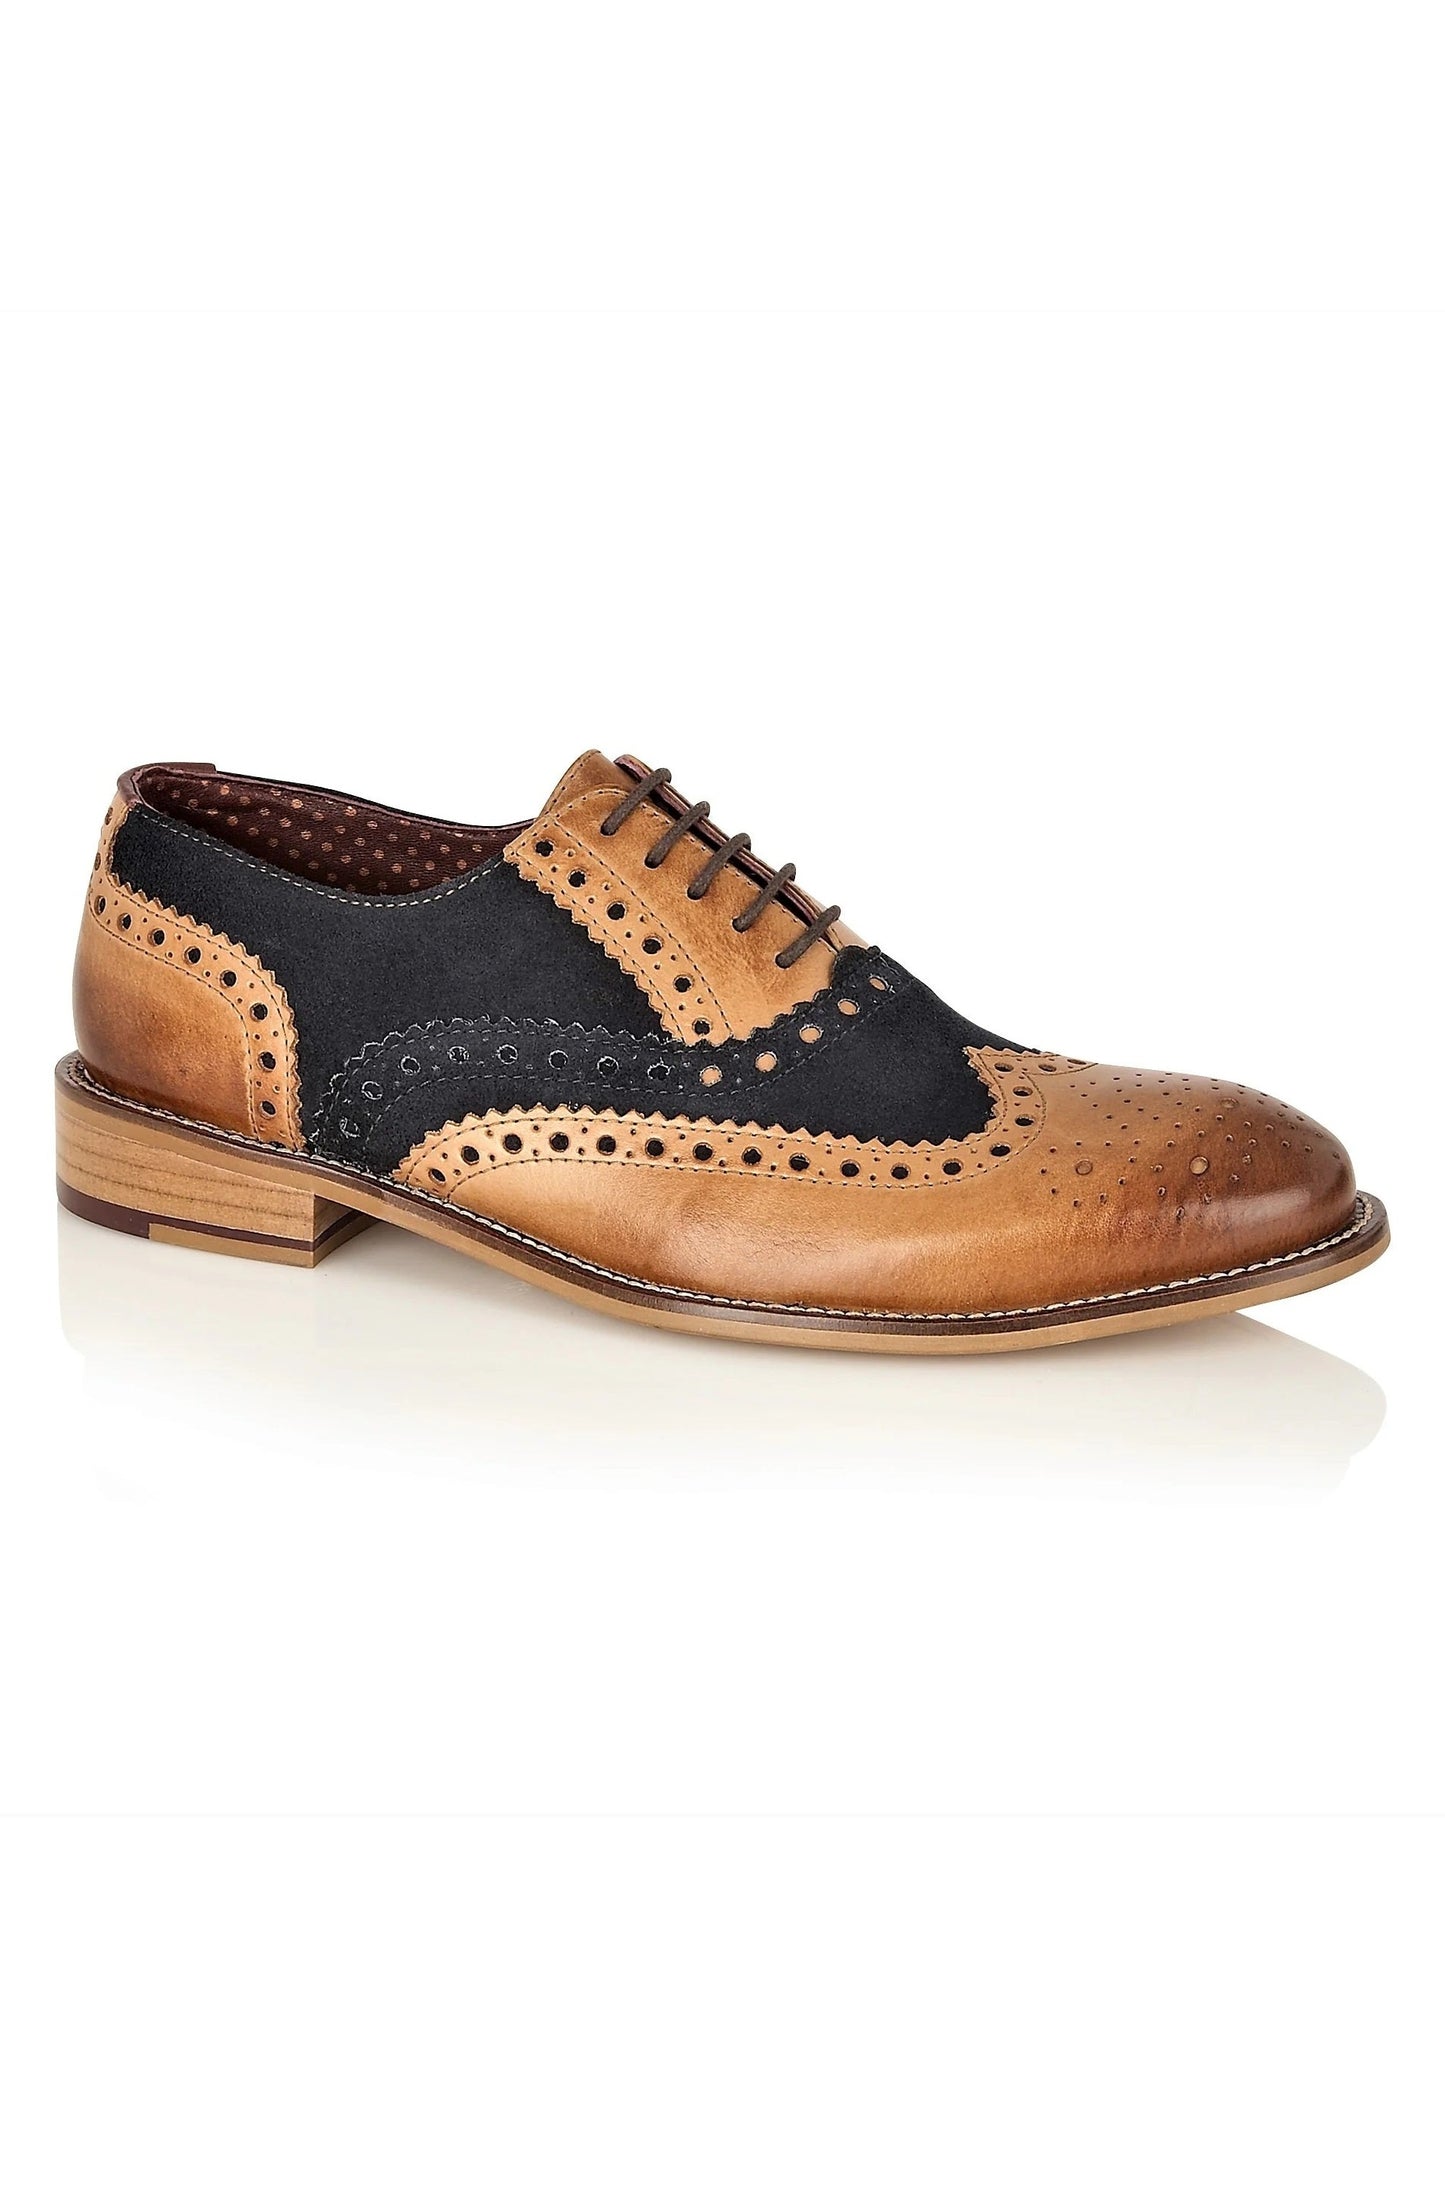 London Brogues Gatsby Tan / Navy Leather Brogue Shoes